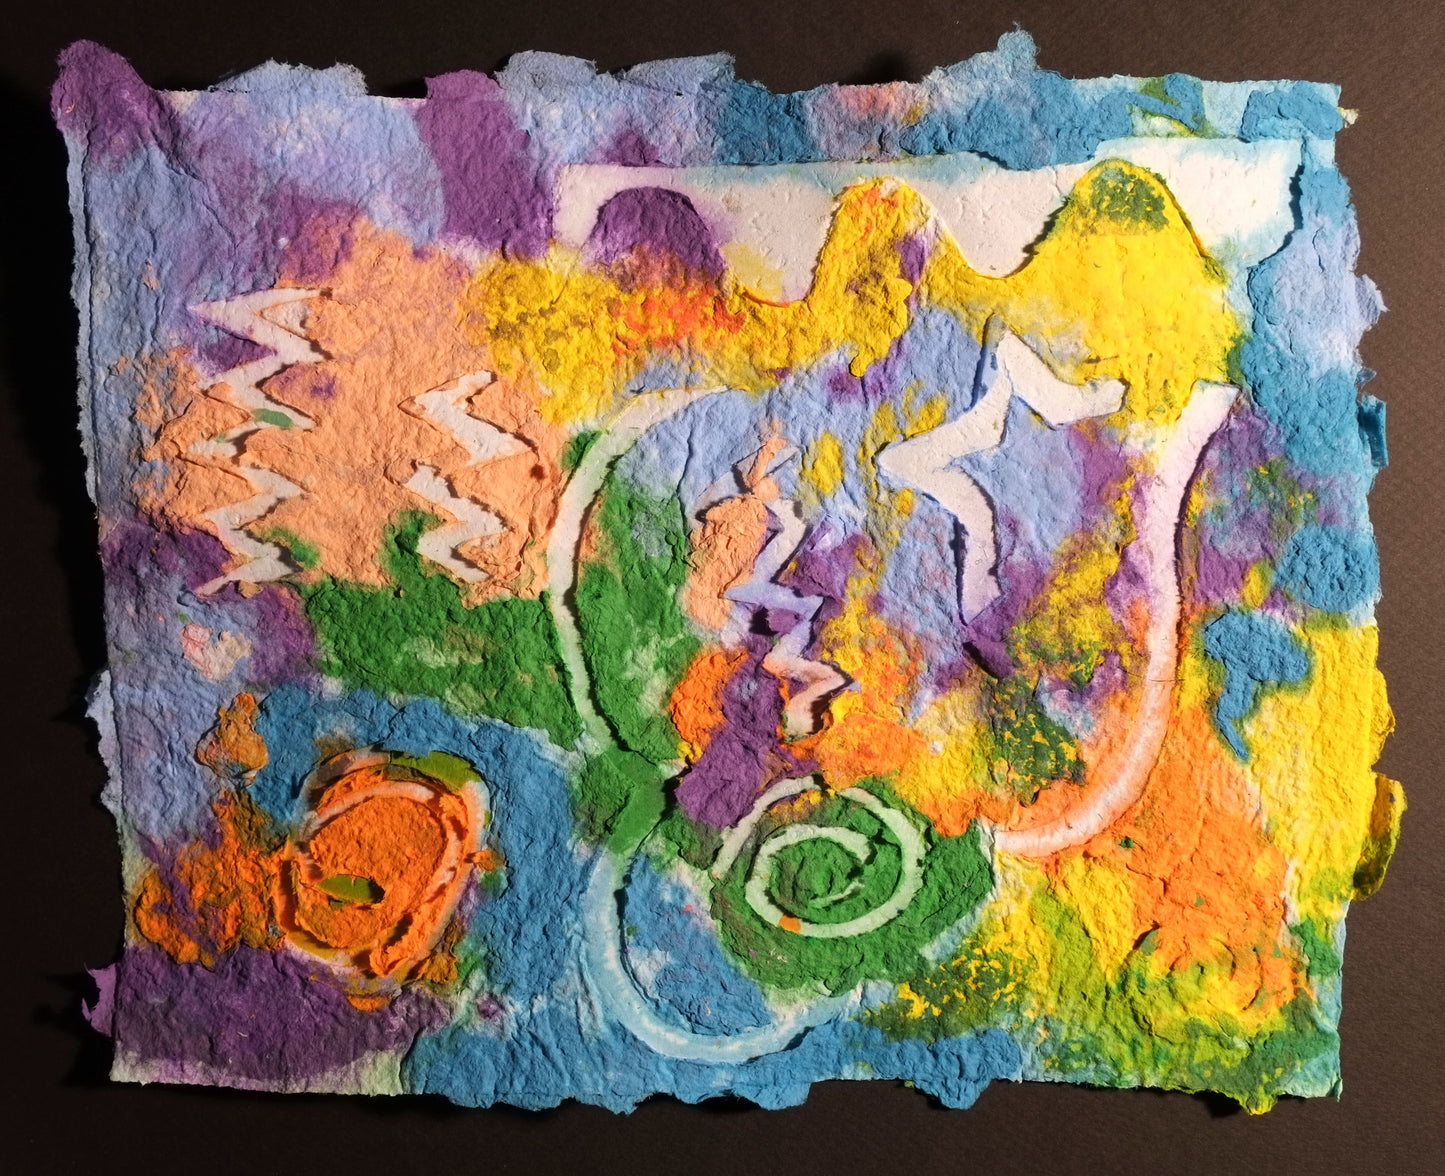 Pigment on recycled paper artwork with yellow, blue, purple, orange and green melted colors in the background with white shapes and swirls